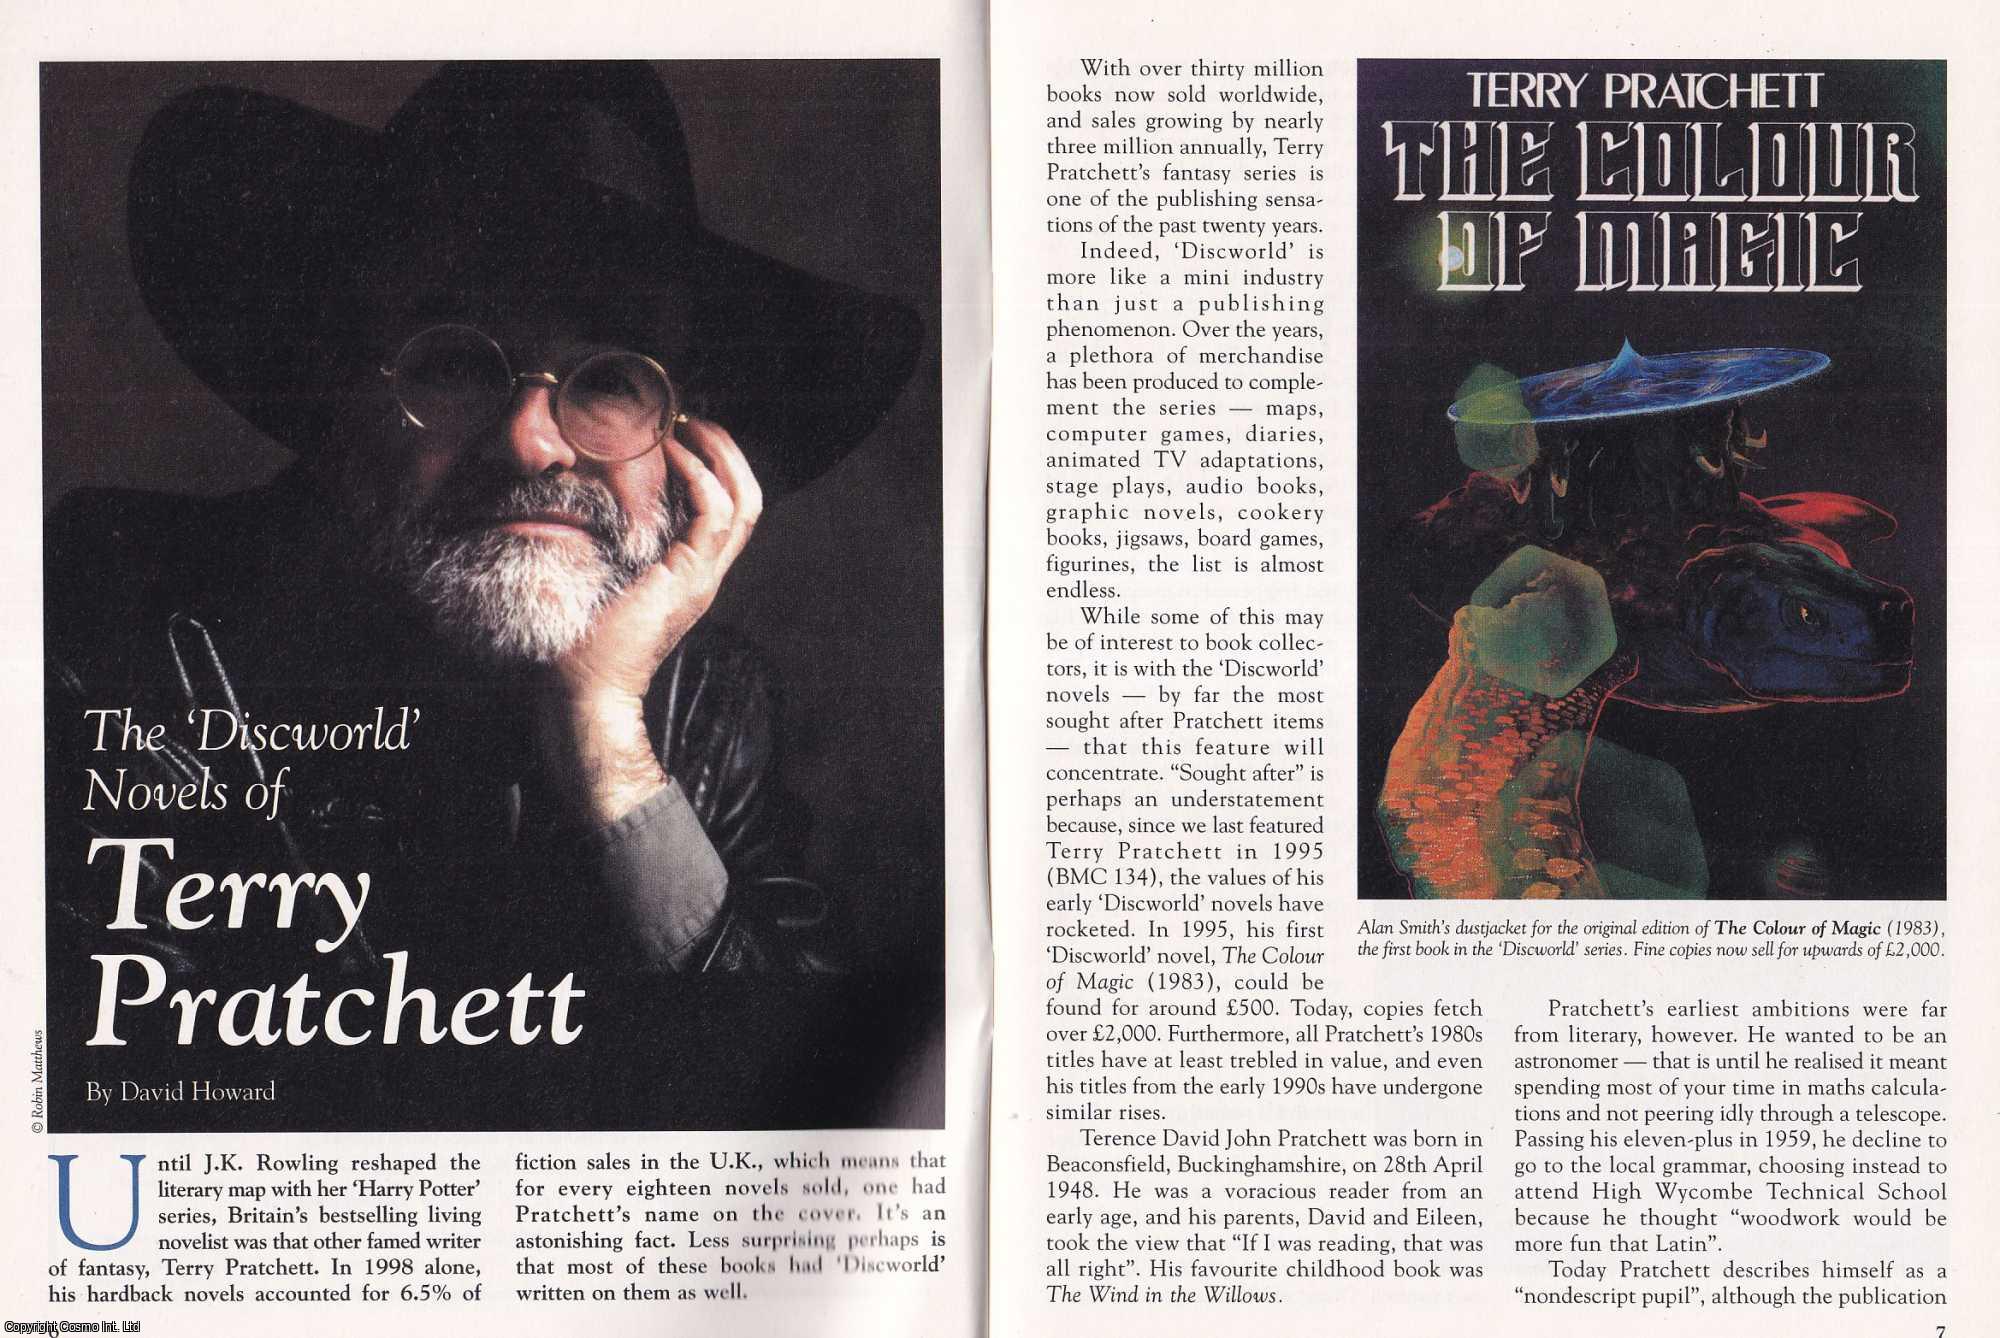 David Howard - The Discworld Novels of Terry Pratchett. This is an original article separated from an issue of The Book & Magazine Collector publication, 2003.